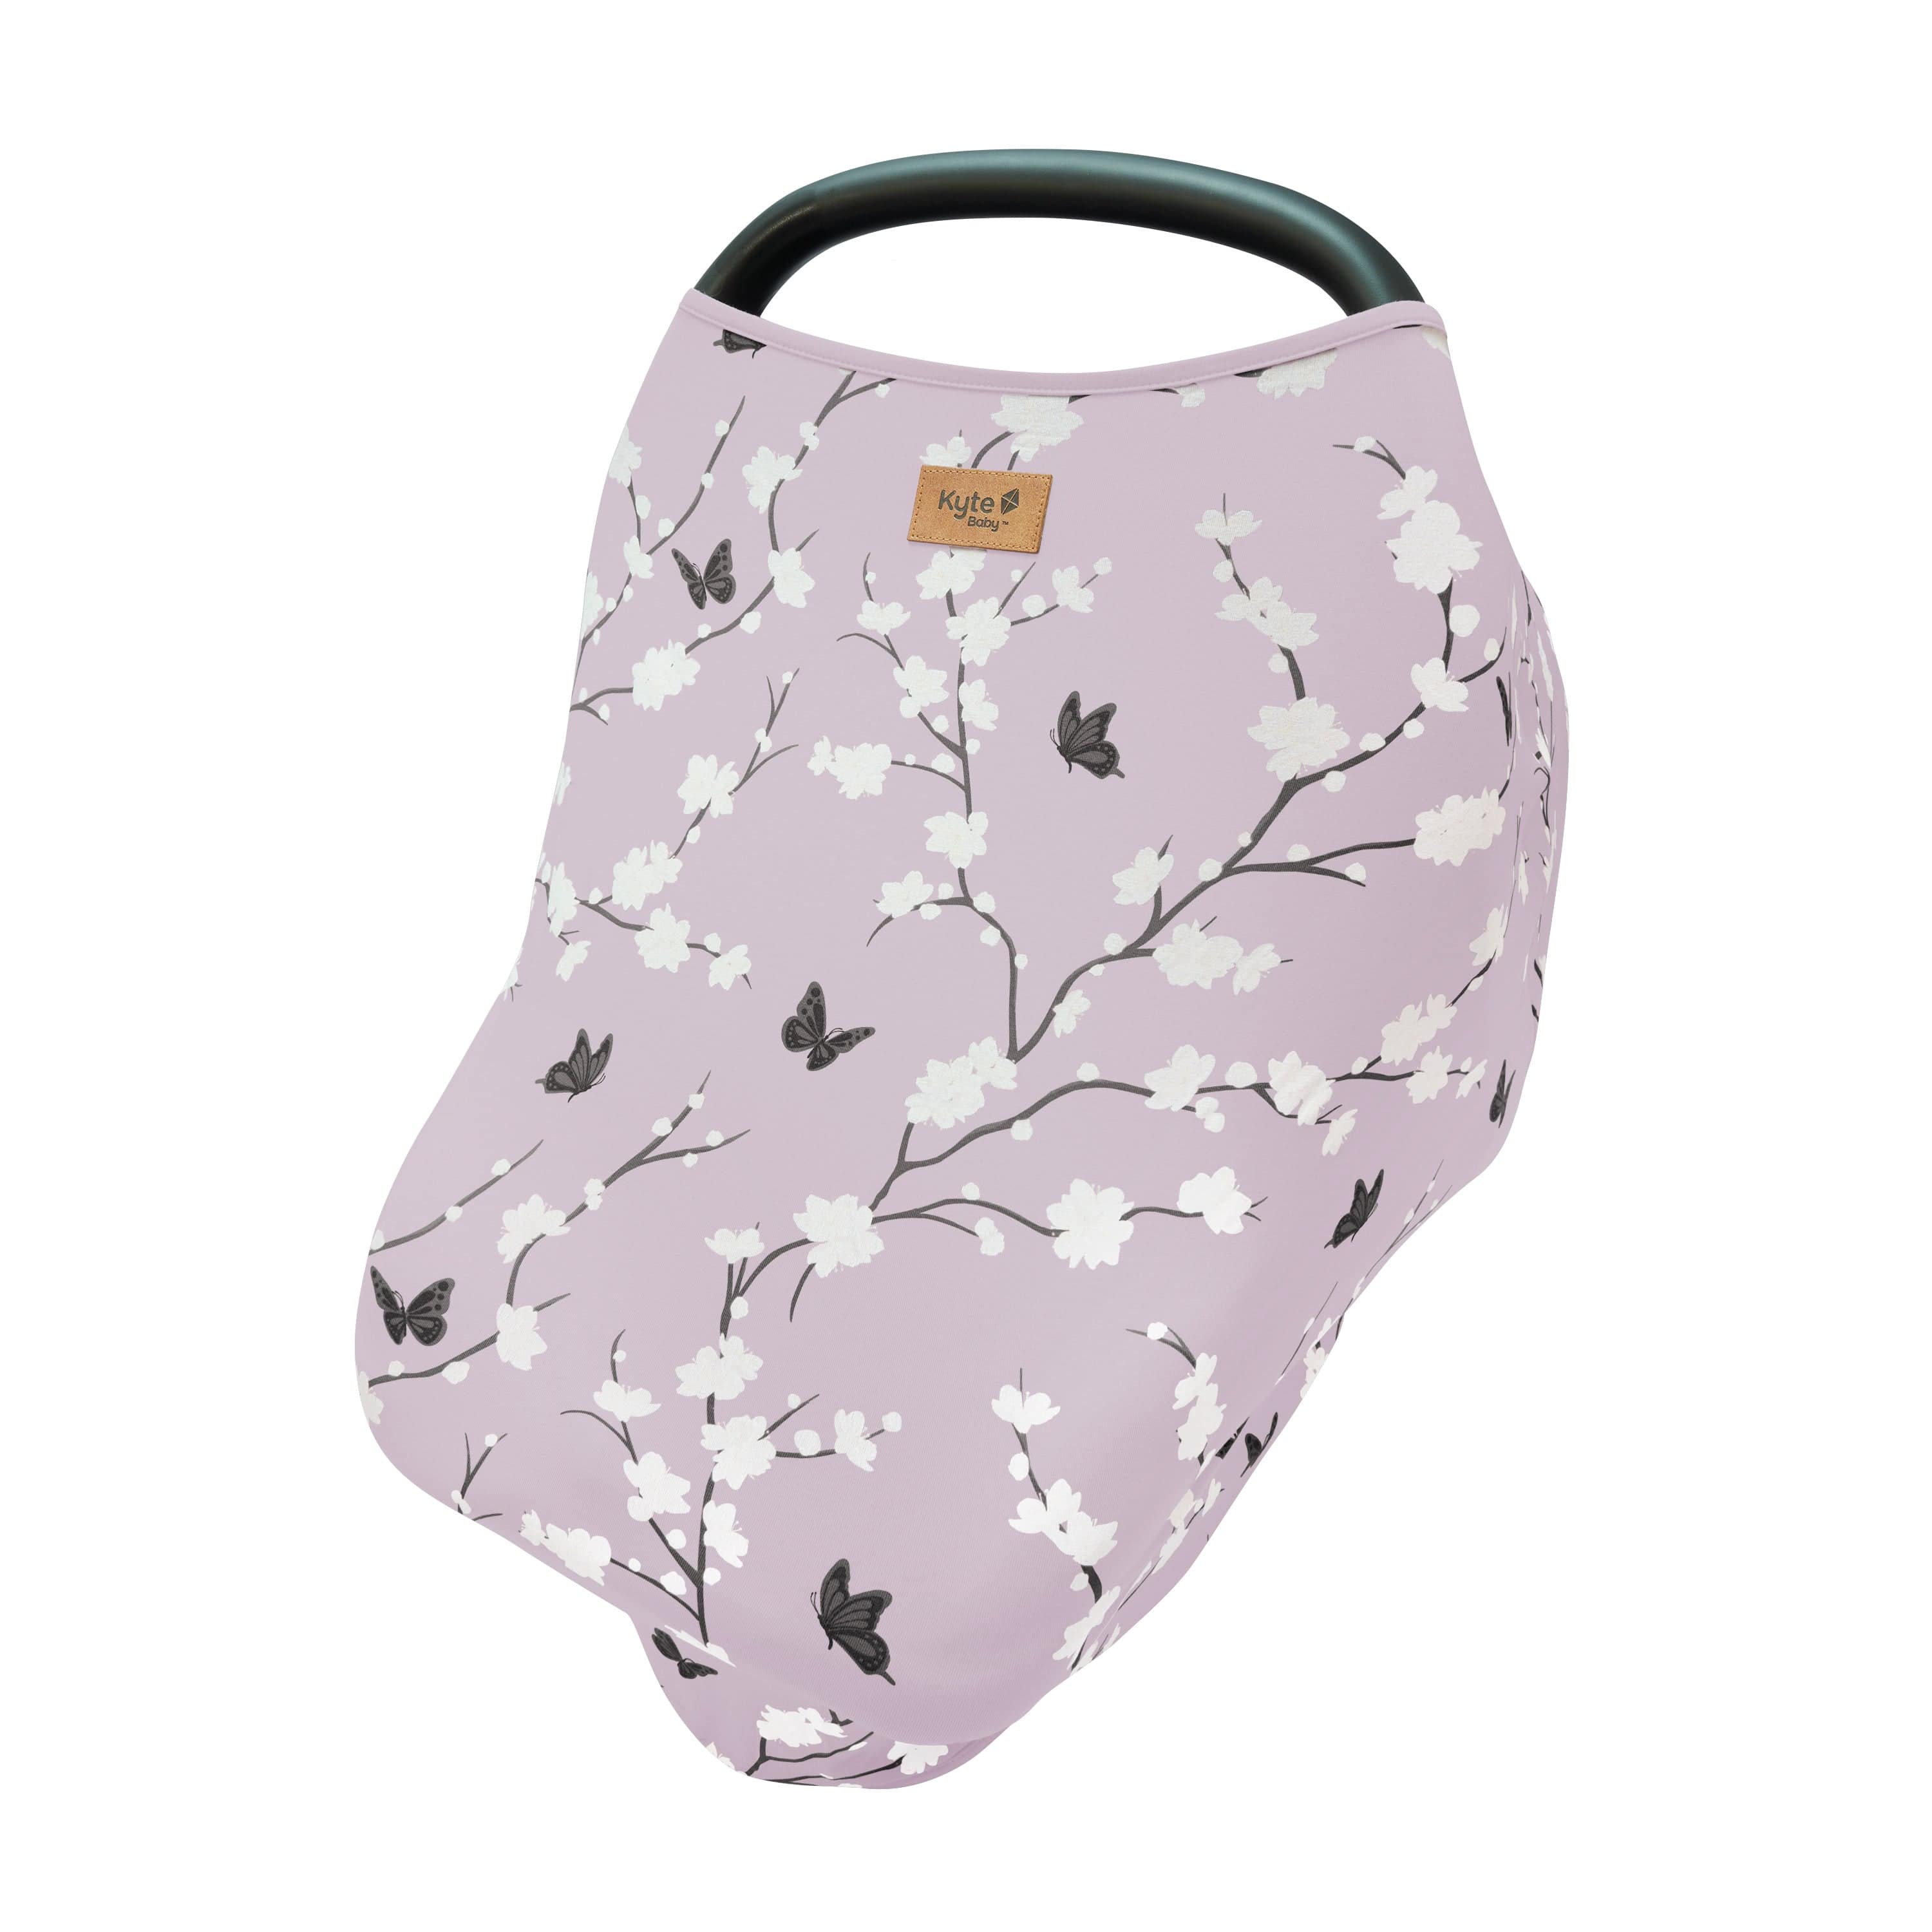 Kyte Baby Car Seat Cover in Cherry Blossom